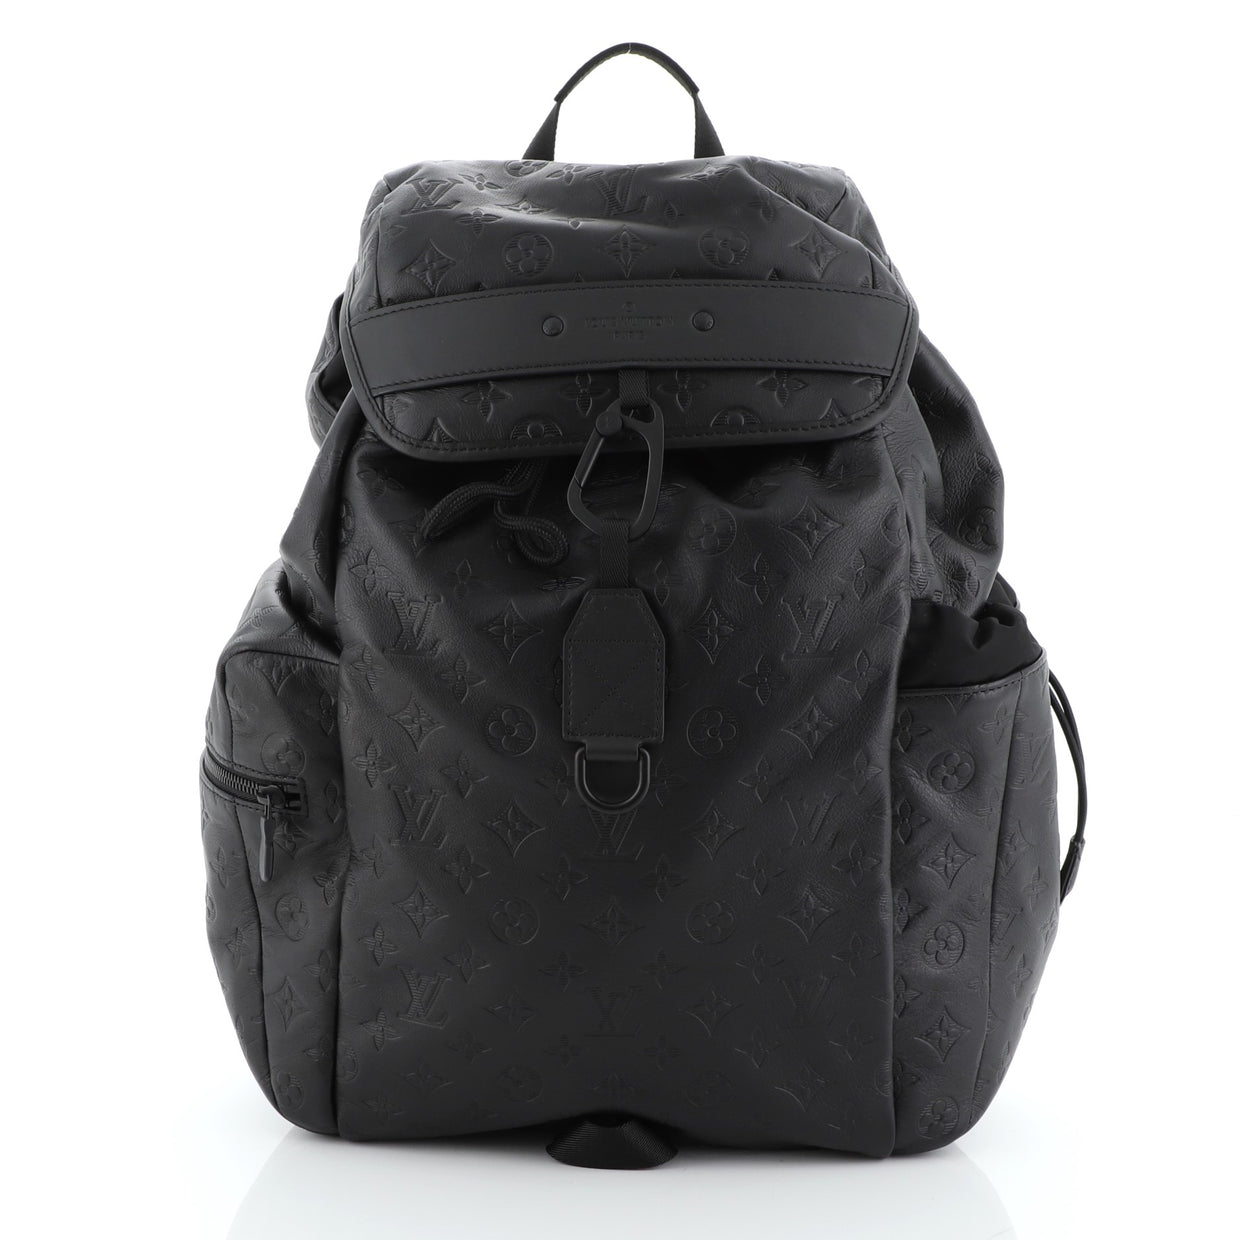 Louis Vuitton Discovery Backpack Monogram Shadow Leather Black 491811